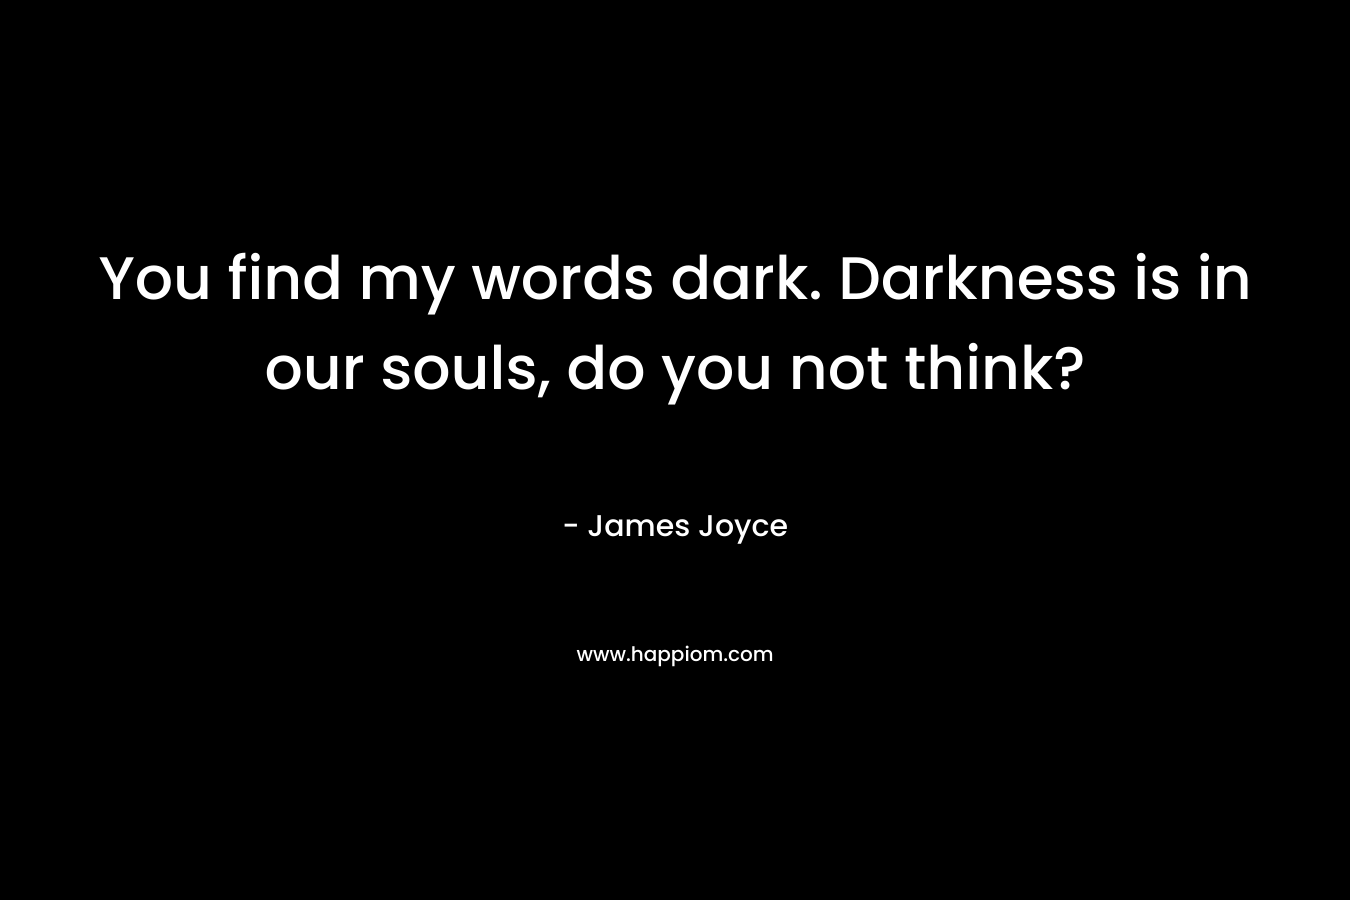 You find my words dark. Darkness is in our souls, do you not think? – James Joyce